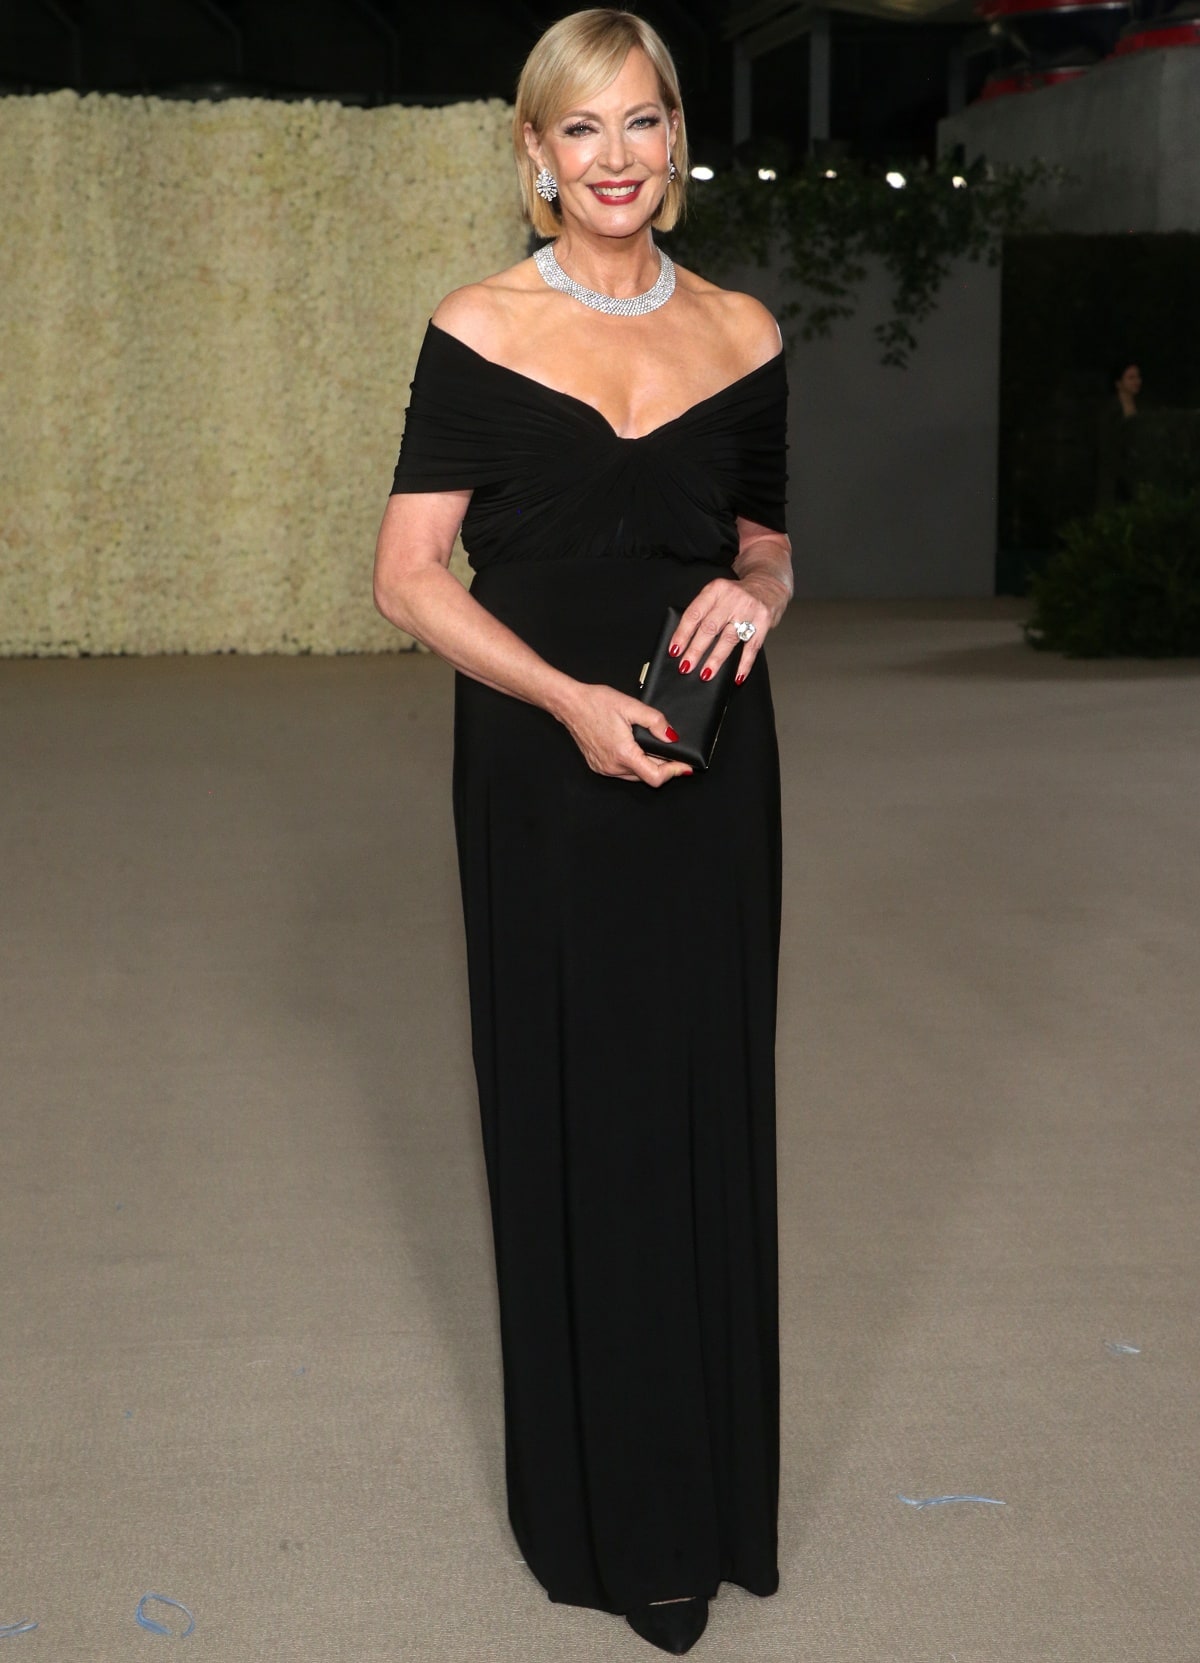 Allison Janney looking elegant in a Brandon Maxwell dress at the 2nd Annual Academy Museum Gala